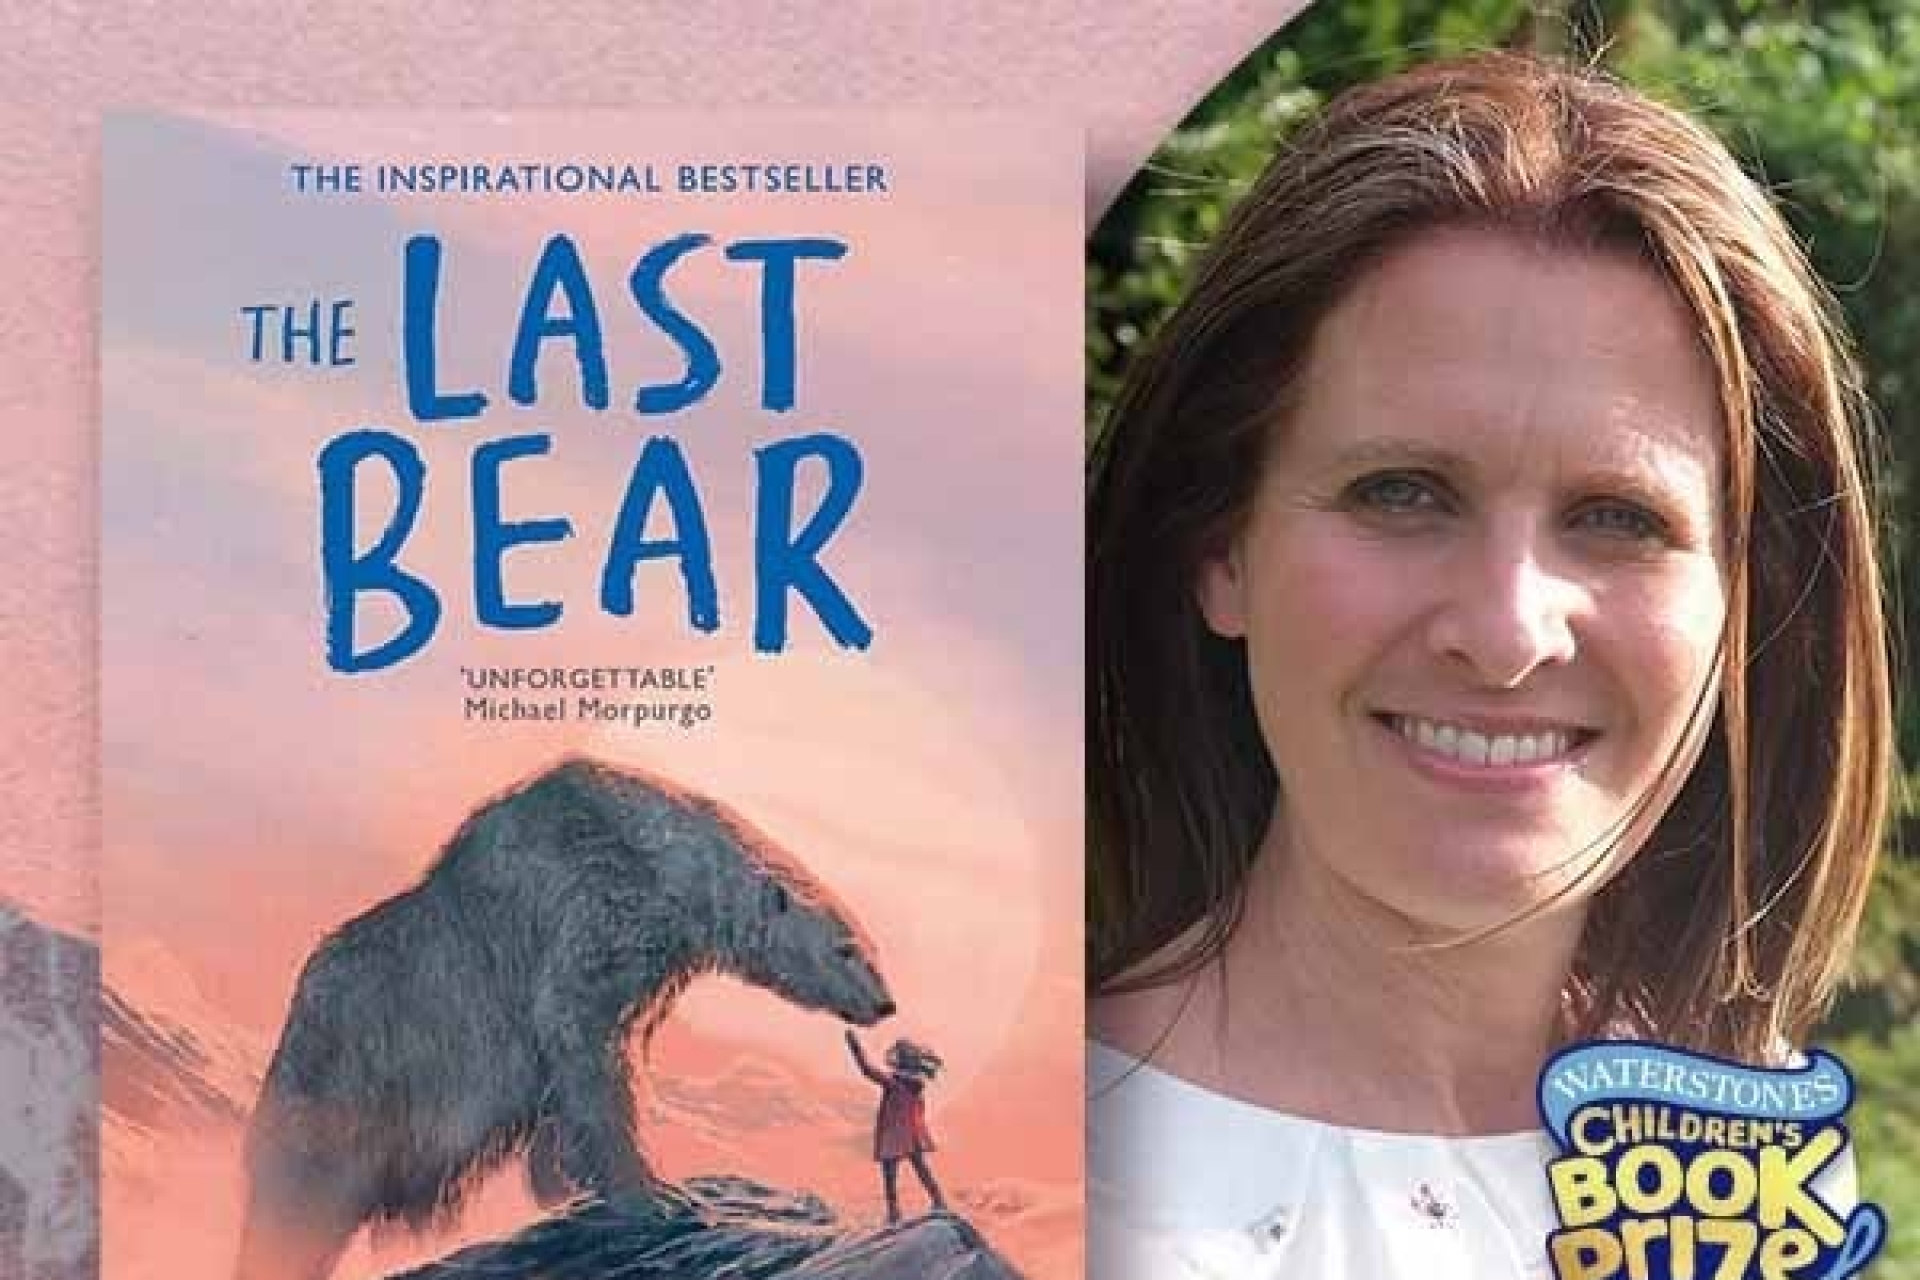 The Last Bear Takes Gold in the Waterstones Children’s Book Prize 2022